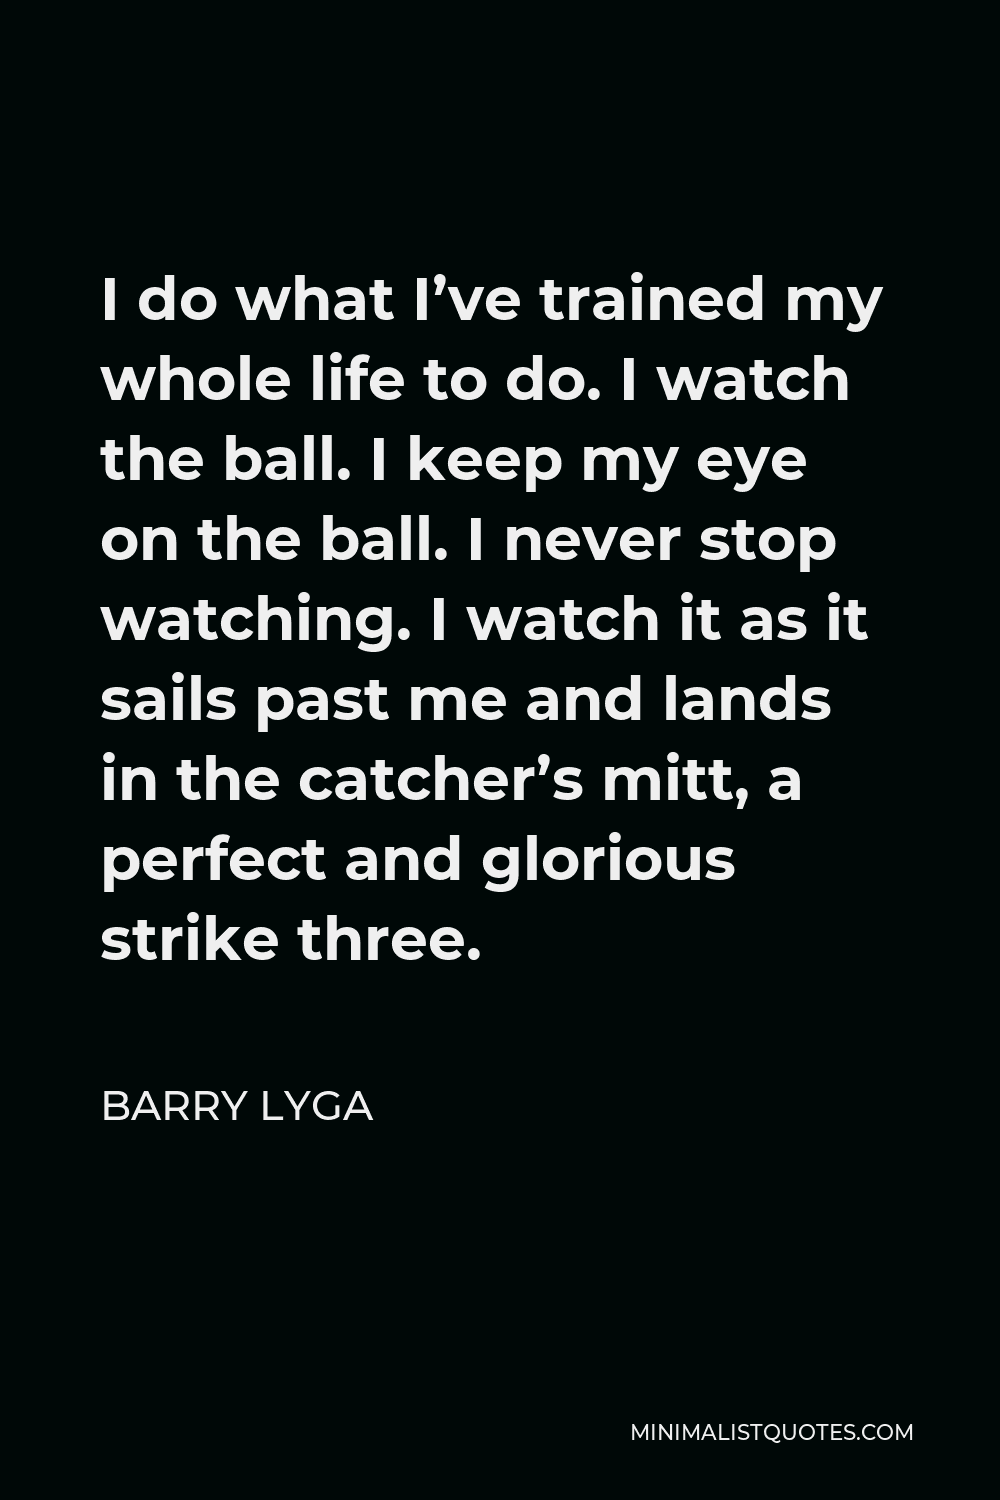 Barry Lyga Quote - I do what I’ve trained my whole life to do. I watch the ball. I keep my eye on the ball. I never stop watching. I watch it as it sails past me and lands in the catcher’s mitt, a perfect and glorious strike three.